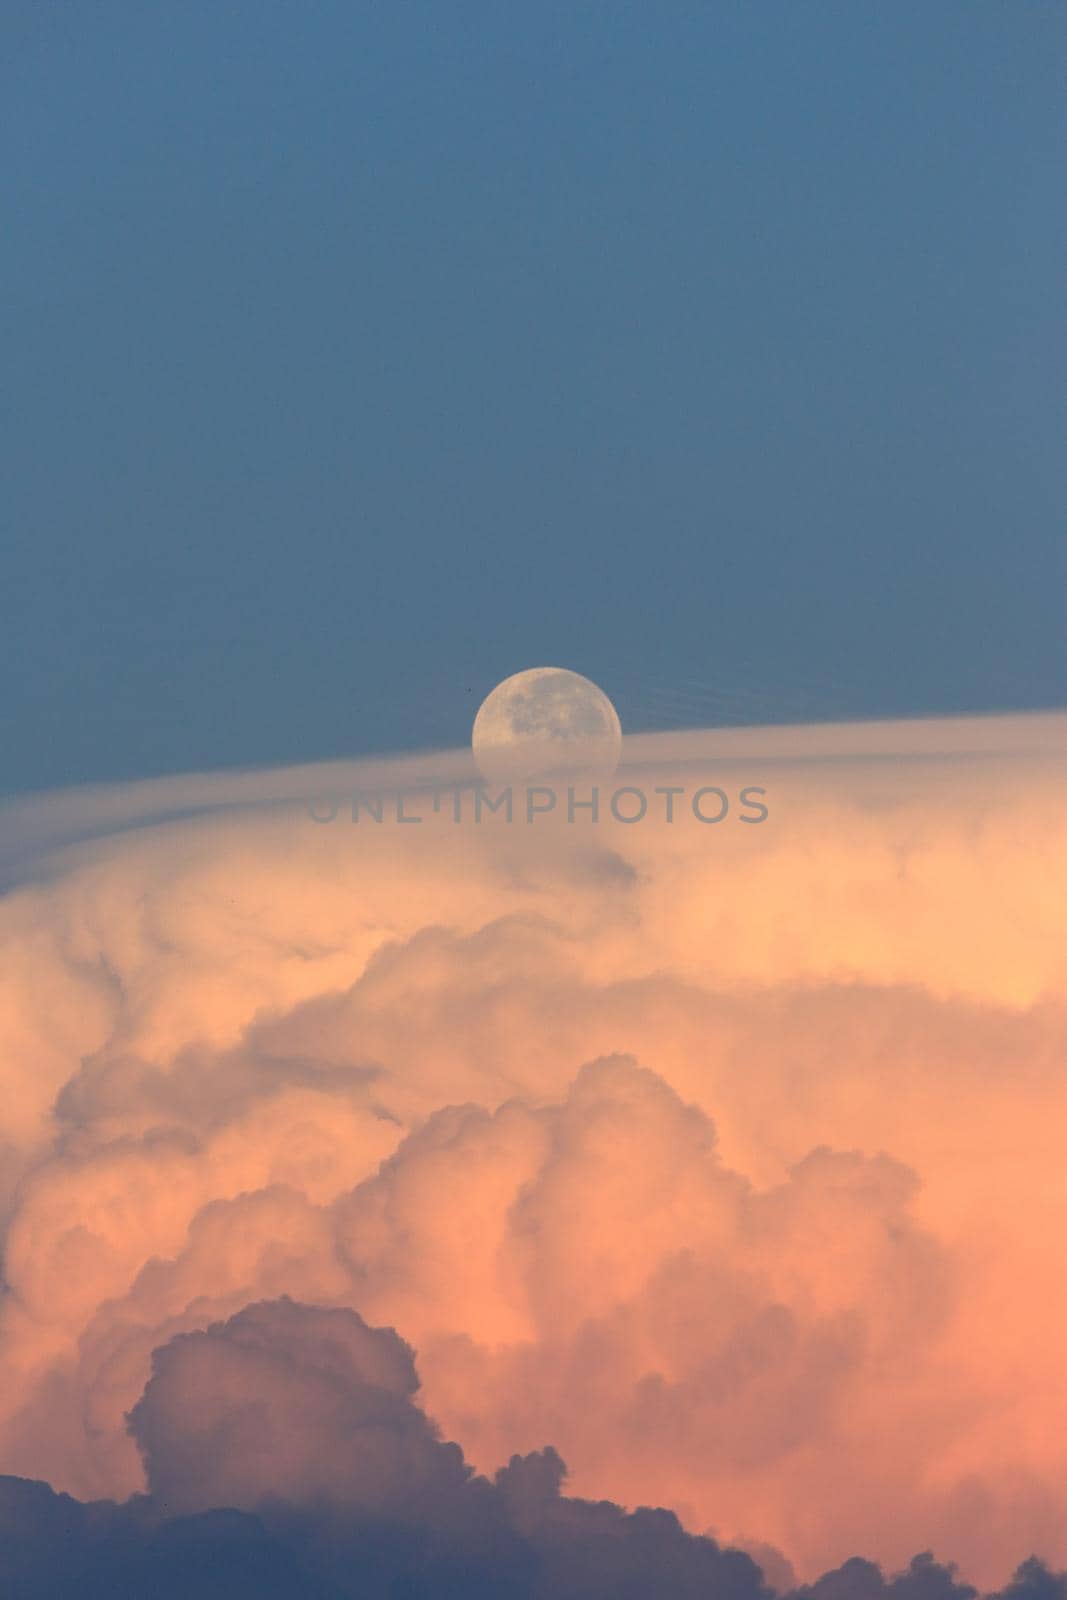 Photo set of clouds, sunset and the moon before dusk by nuisk17